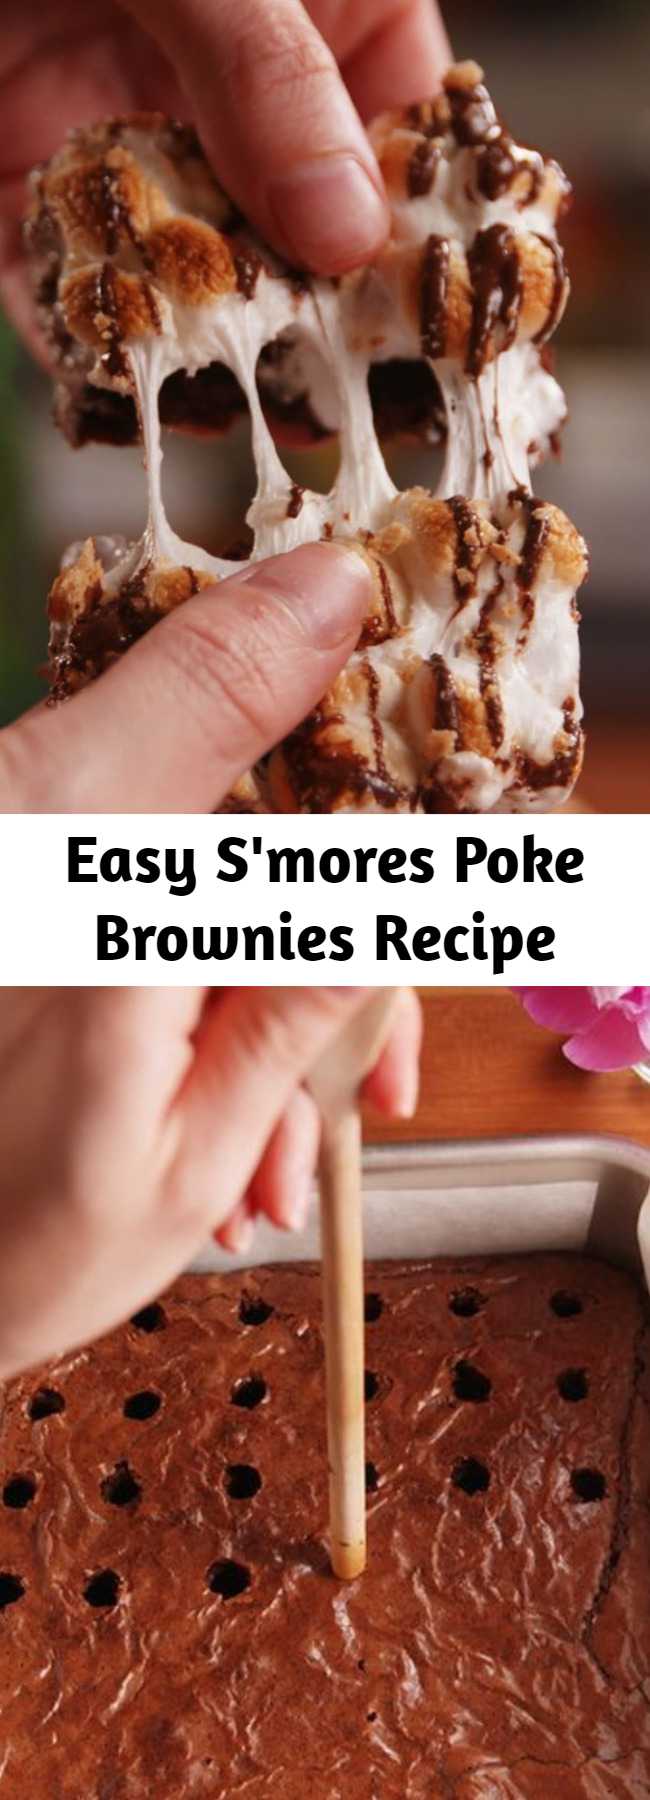 Easy S'mores Poke Brownies Recipe - Just when we thought we had seen every type of s'more possible this one blew us away. Brownies get poked AND topped with marshmallows and then drizzled with chocolate. We are in love.